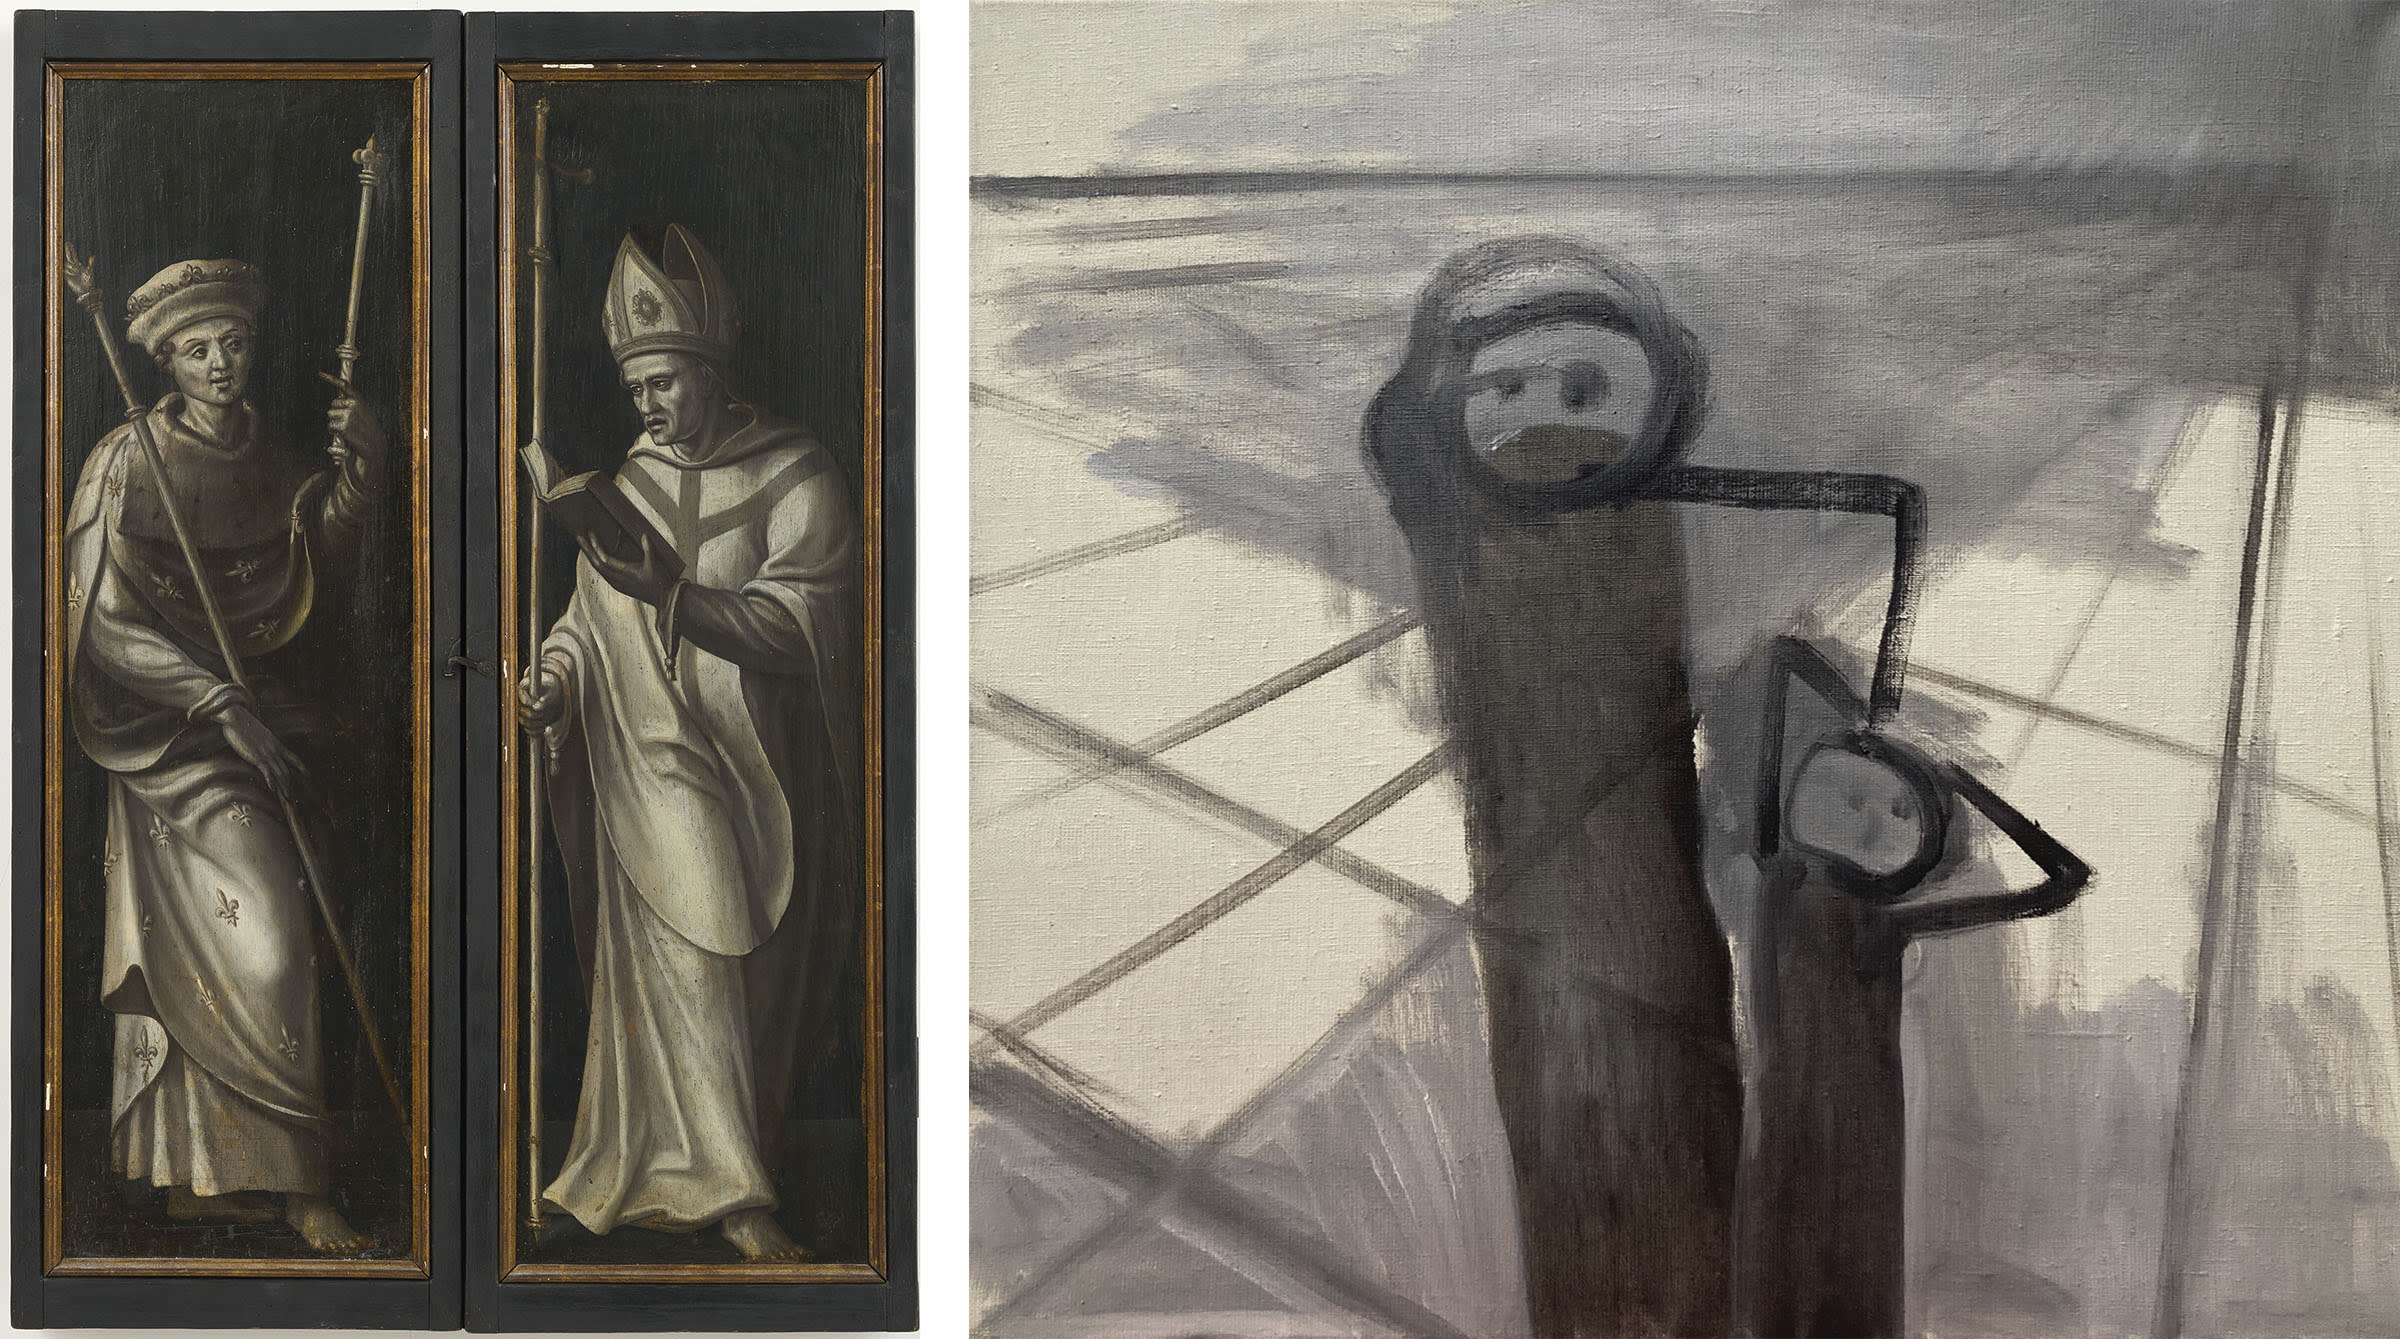 Left: Jan van Scorel, Two figures in grisaille, 16th century. Courtesy of Galerie Jocelyn Wolff. Photo by Fabrice Gousset. Right: Miriam Cahn, grisaille 11.6.07, 2007. Courtesy of the artist, Meyer Riegger, and Galerie Jocelyn Wolff.